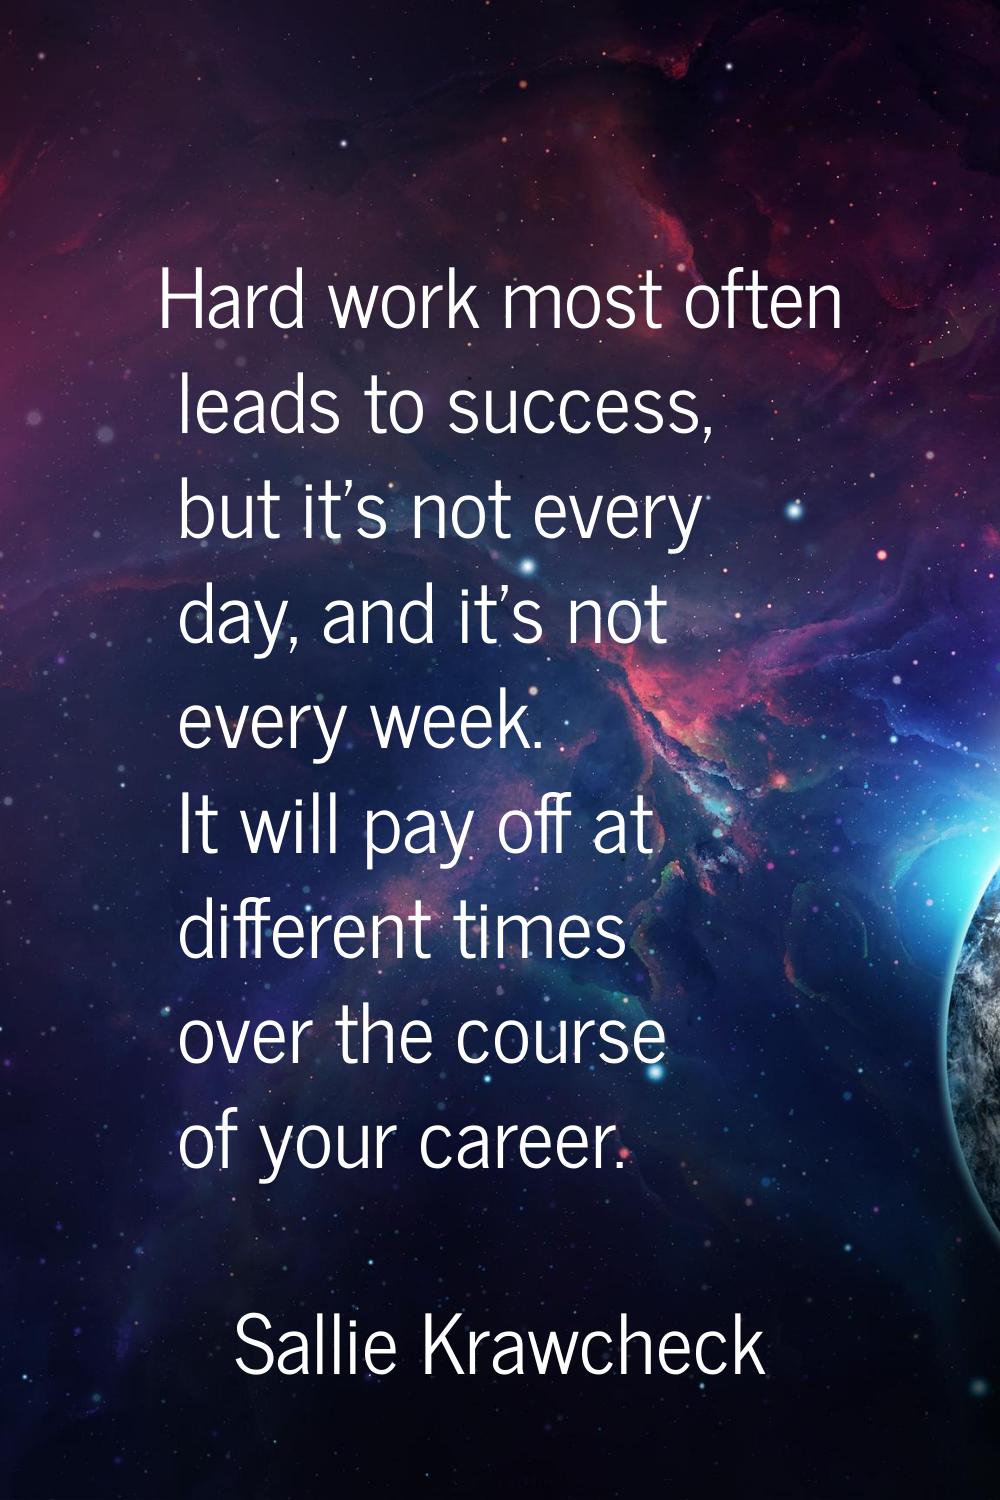 Hard work most often leads to success, but it's not every day, and it's not every week. It will pay